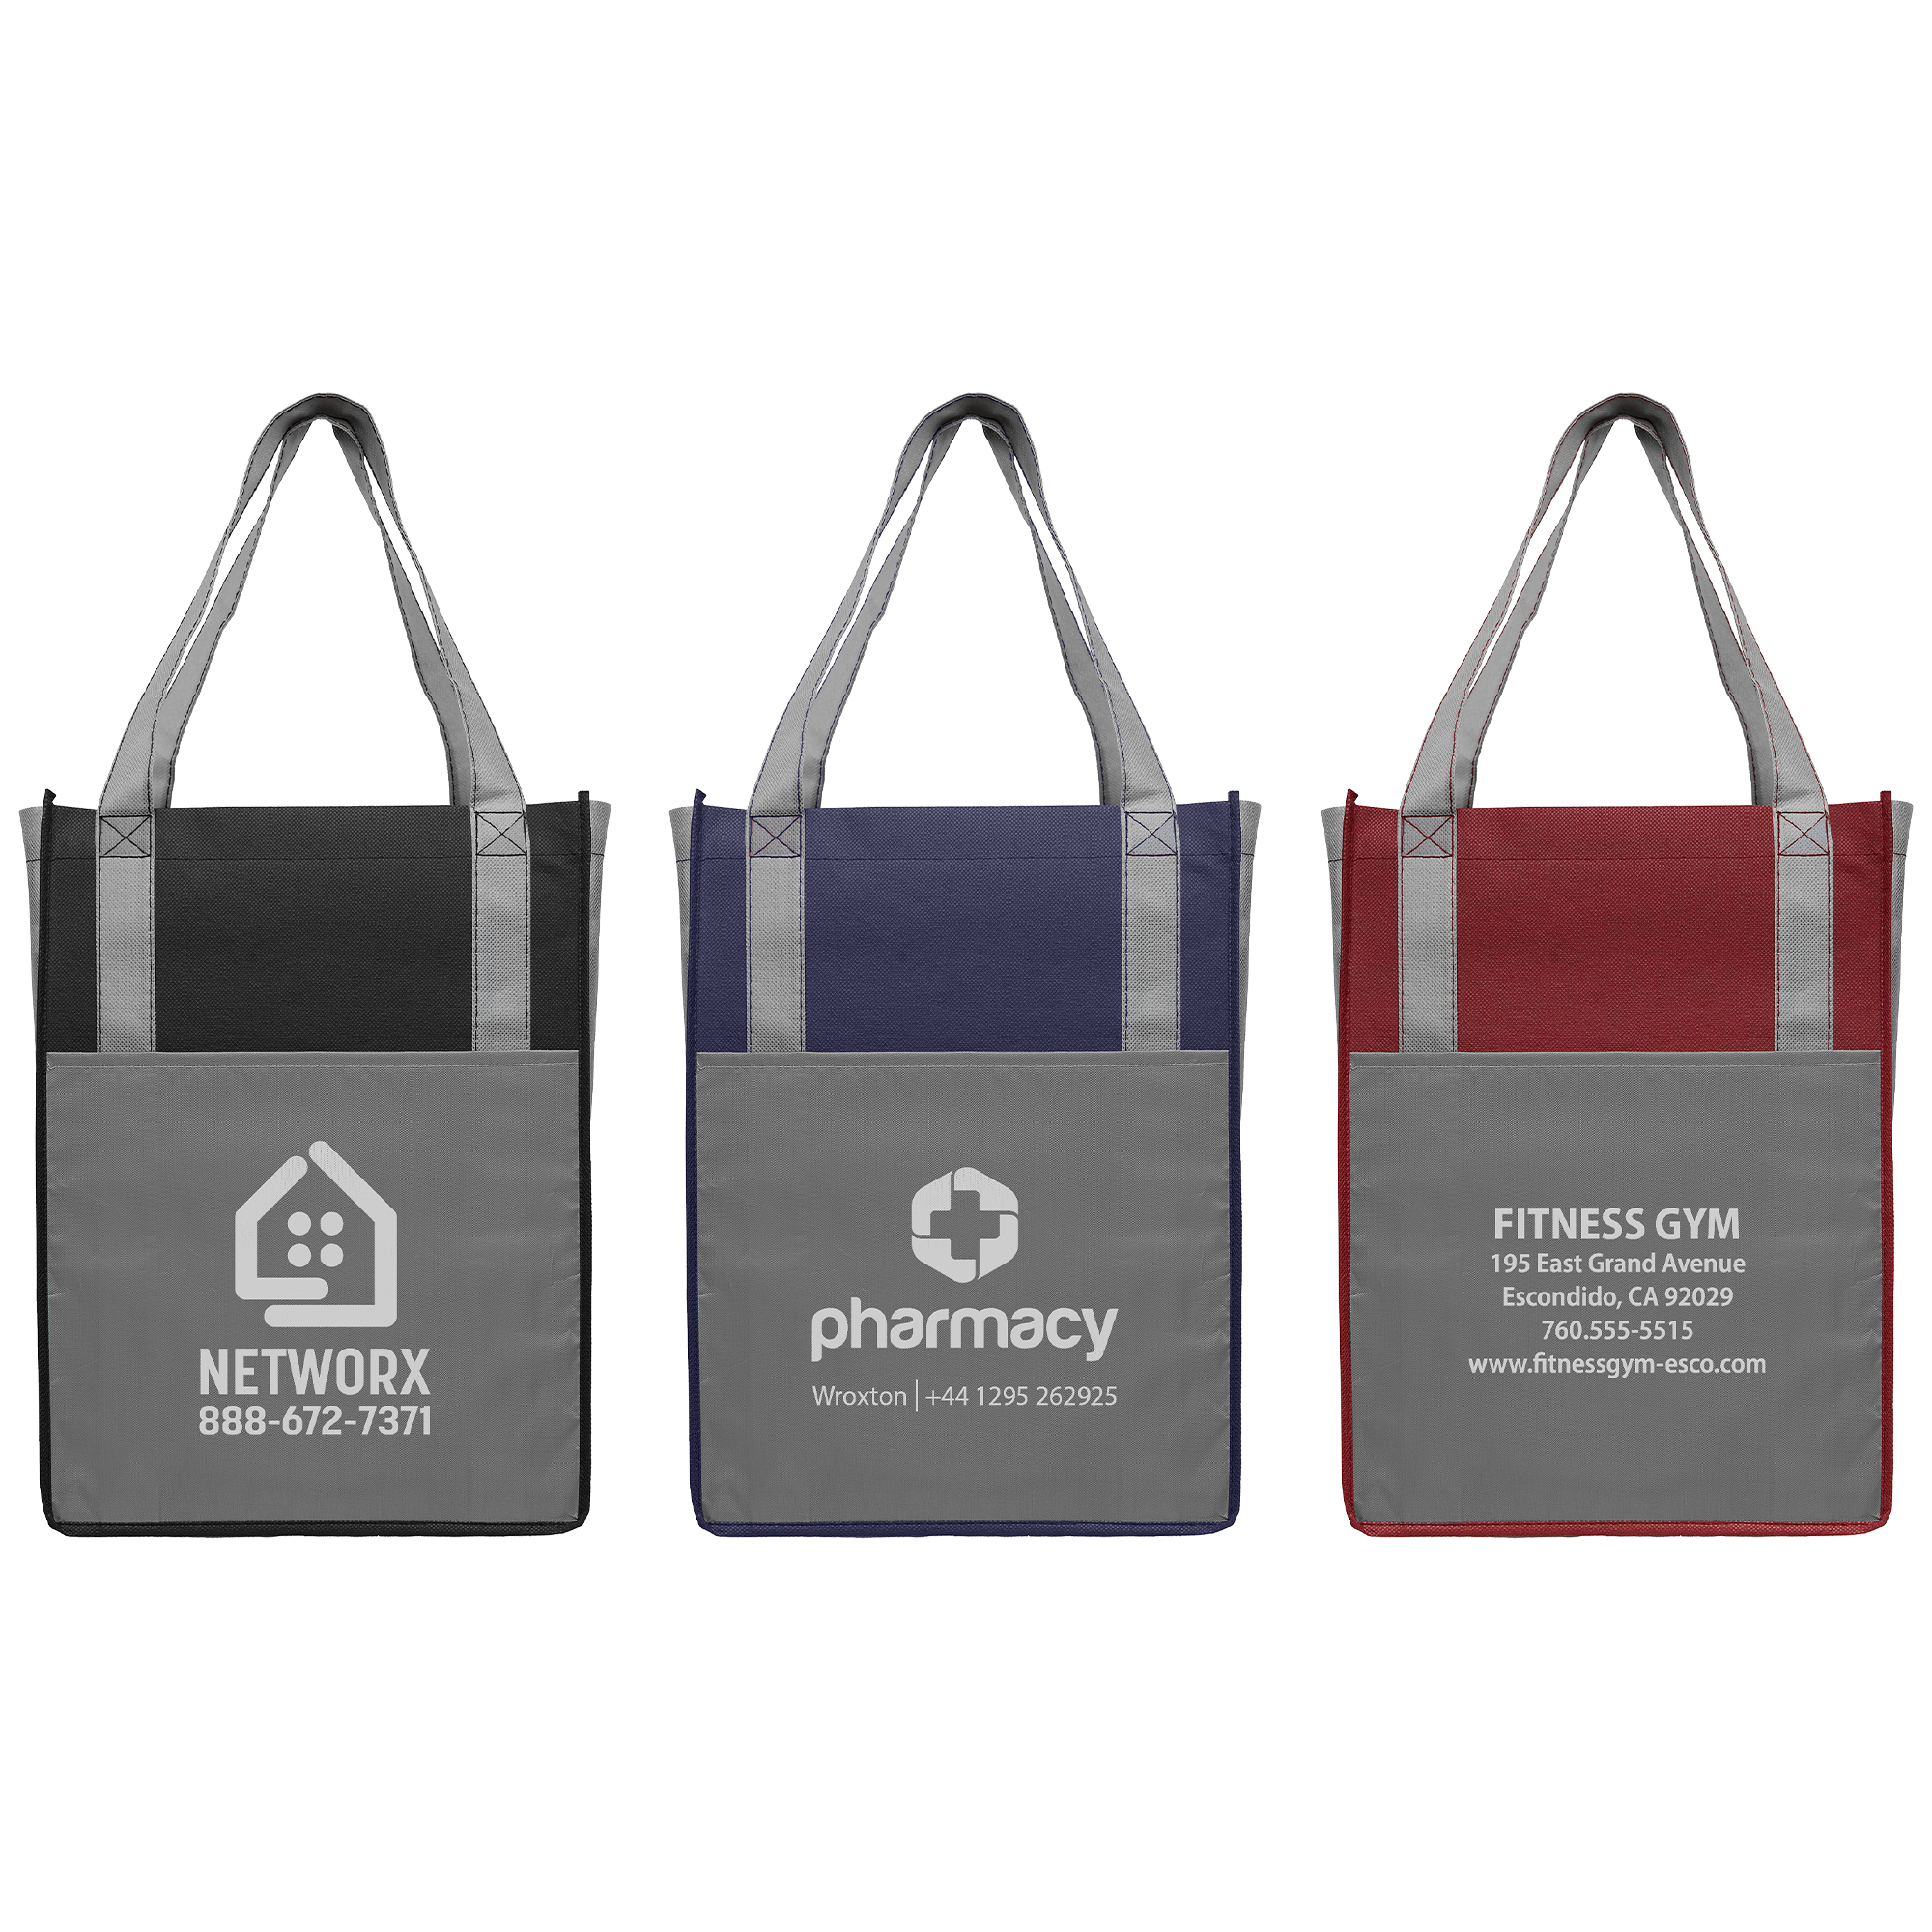 Use Customised Cotton Bags as a Walking Advertisement for Brand Promotion